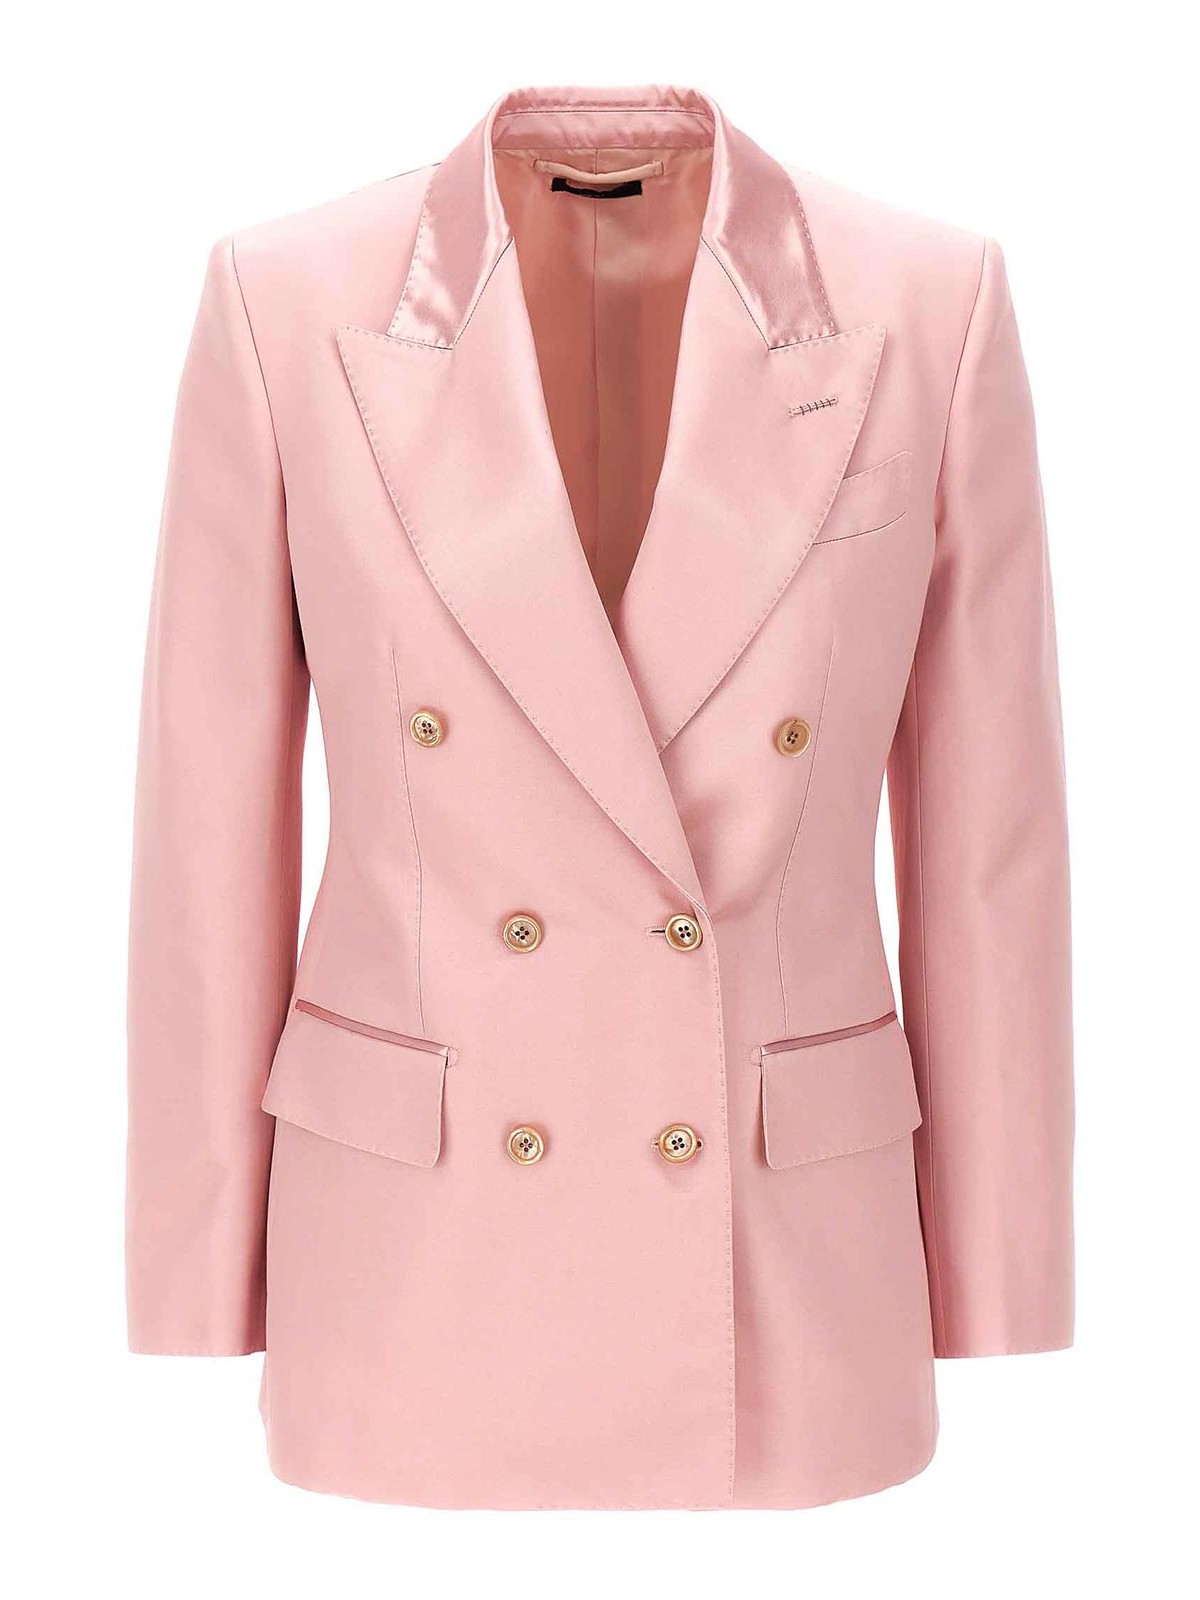 Tom Ford Double-breasted Blazer In Nude & Neutrals